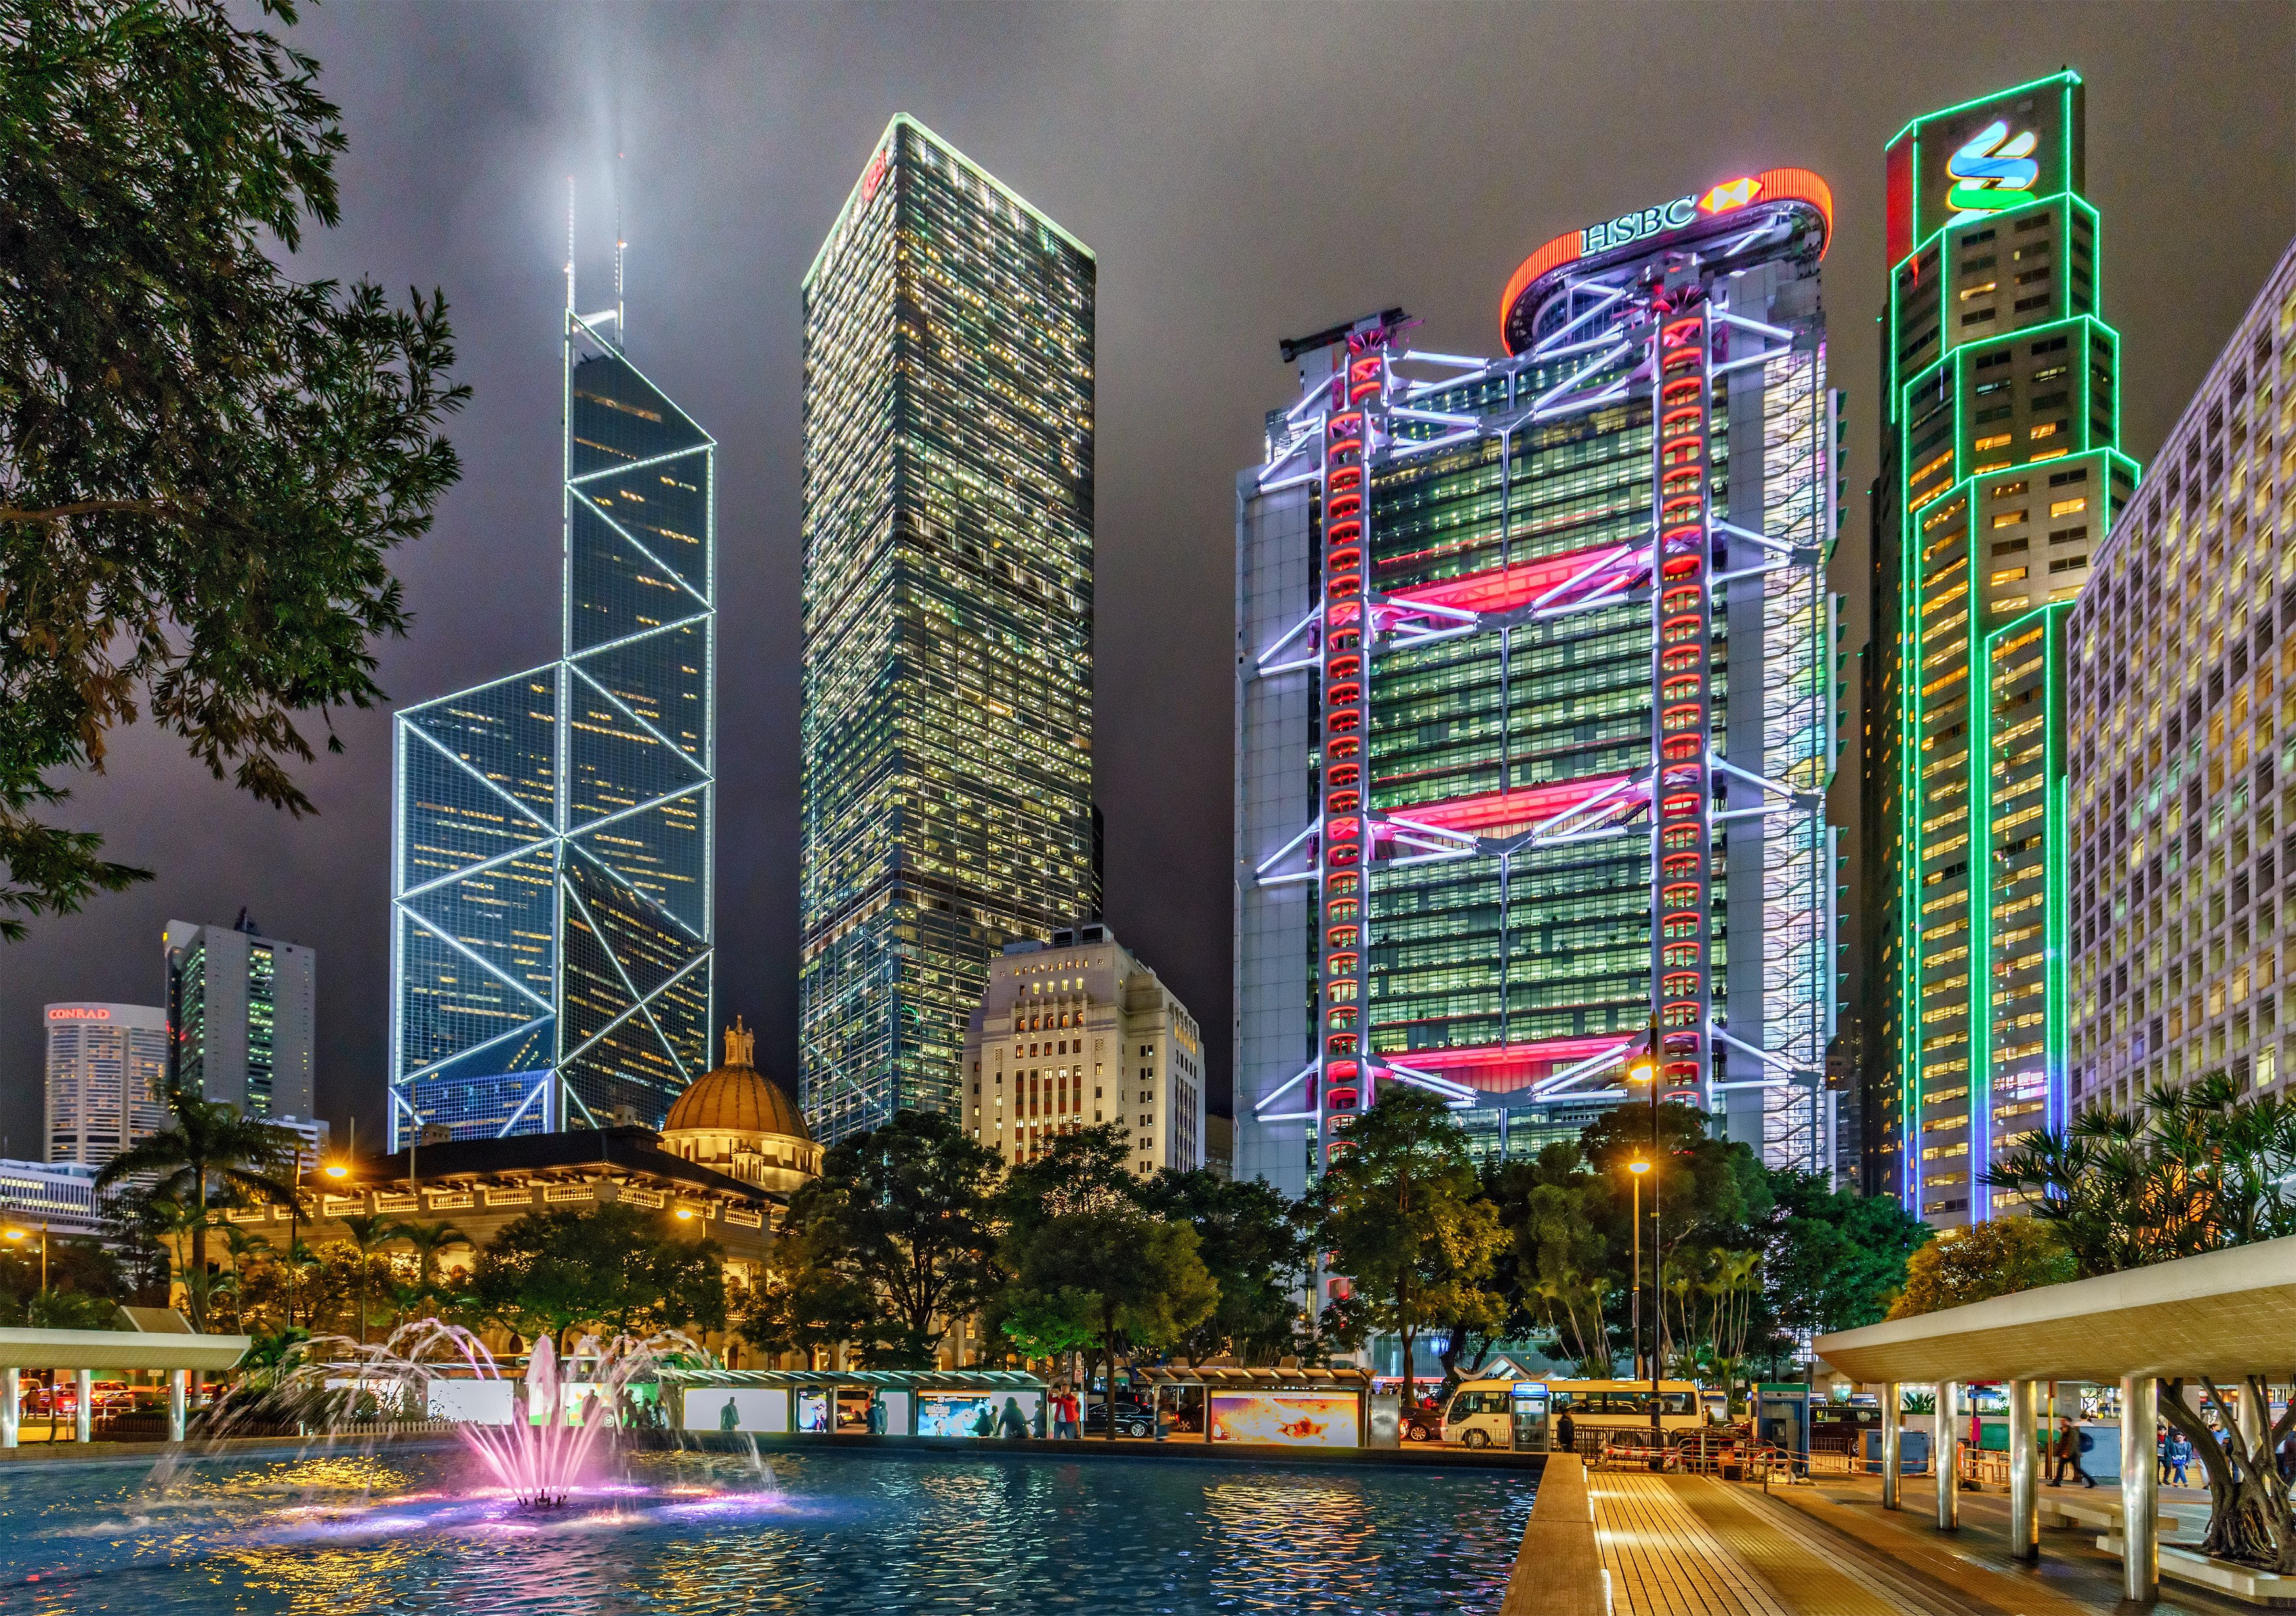 Bank of China Tower (left) in Hong Kong, designed by architect I.M. Pei. Photo: Shutterstock